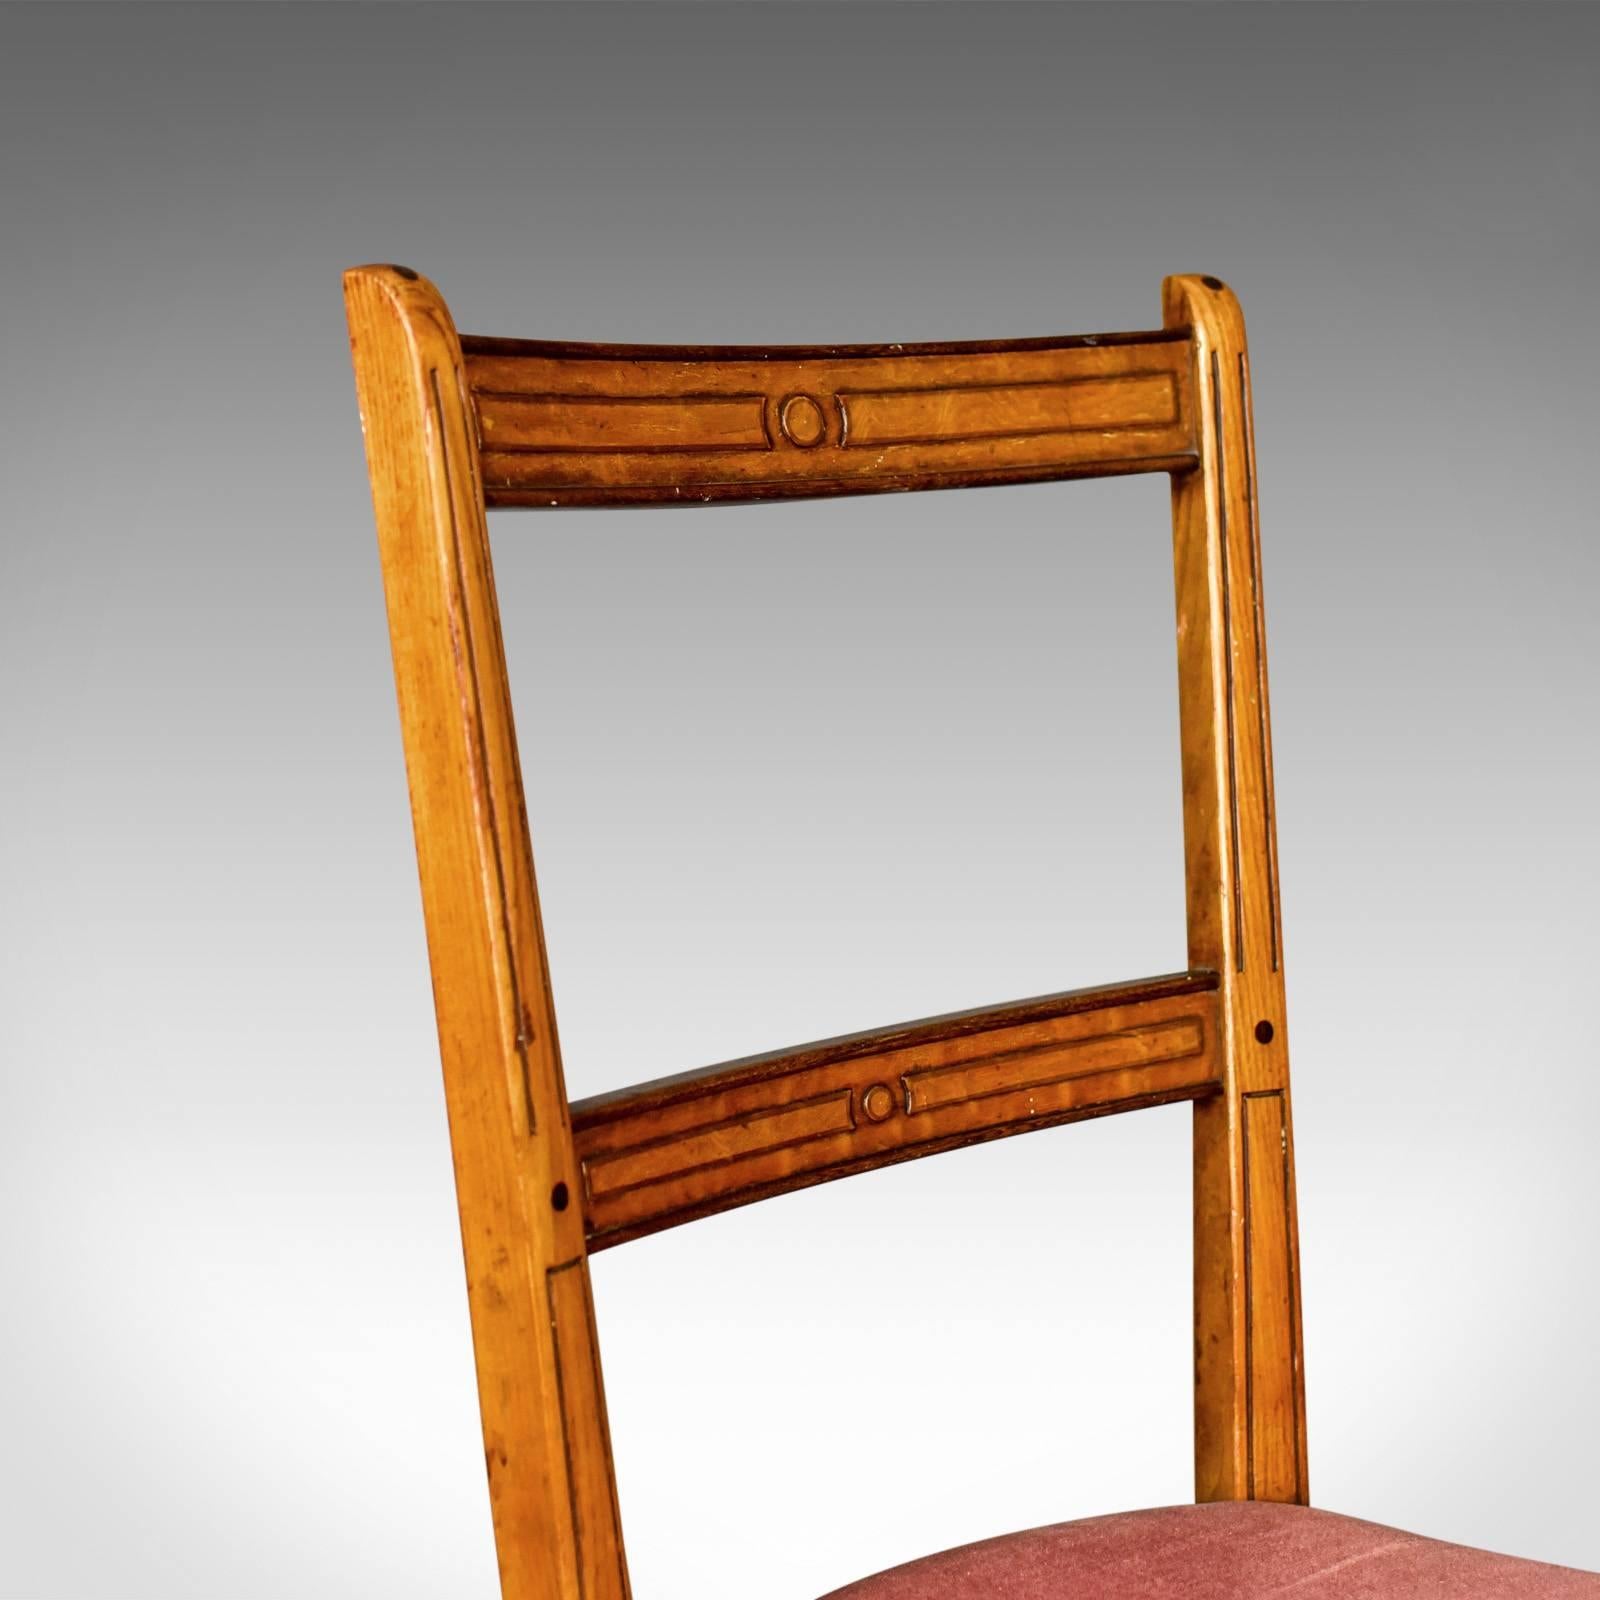 Upholstery Pair of Antique Chairs, Upholstered, Victorian, English Walnut, Side, circa 1880